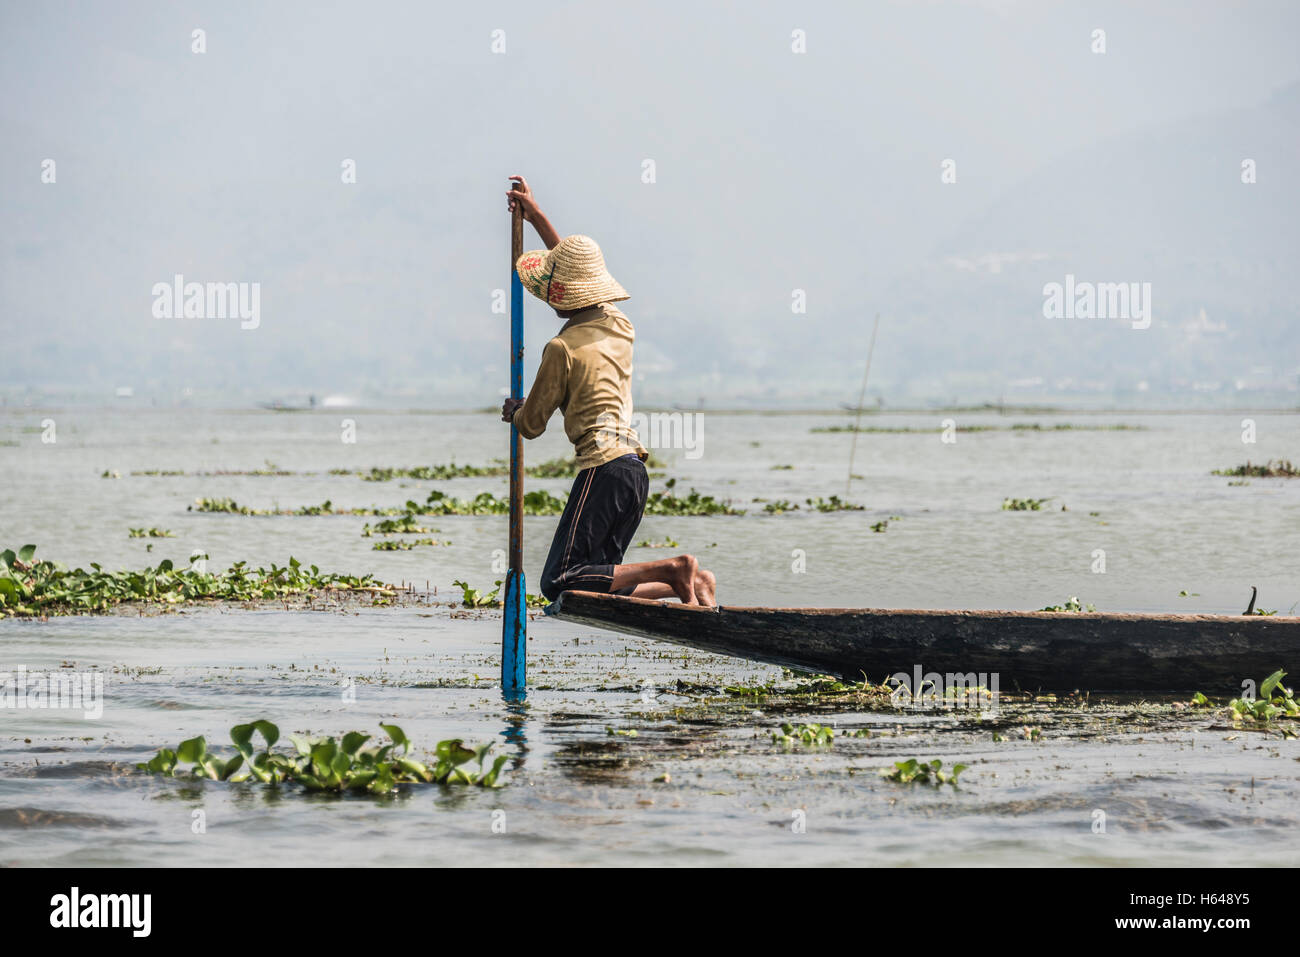 Local fishermen rowing from knees on fishing boat, Inle Lake, Shan State, Myanmar Stock Photo